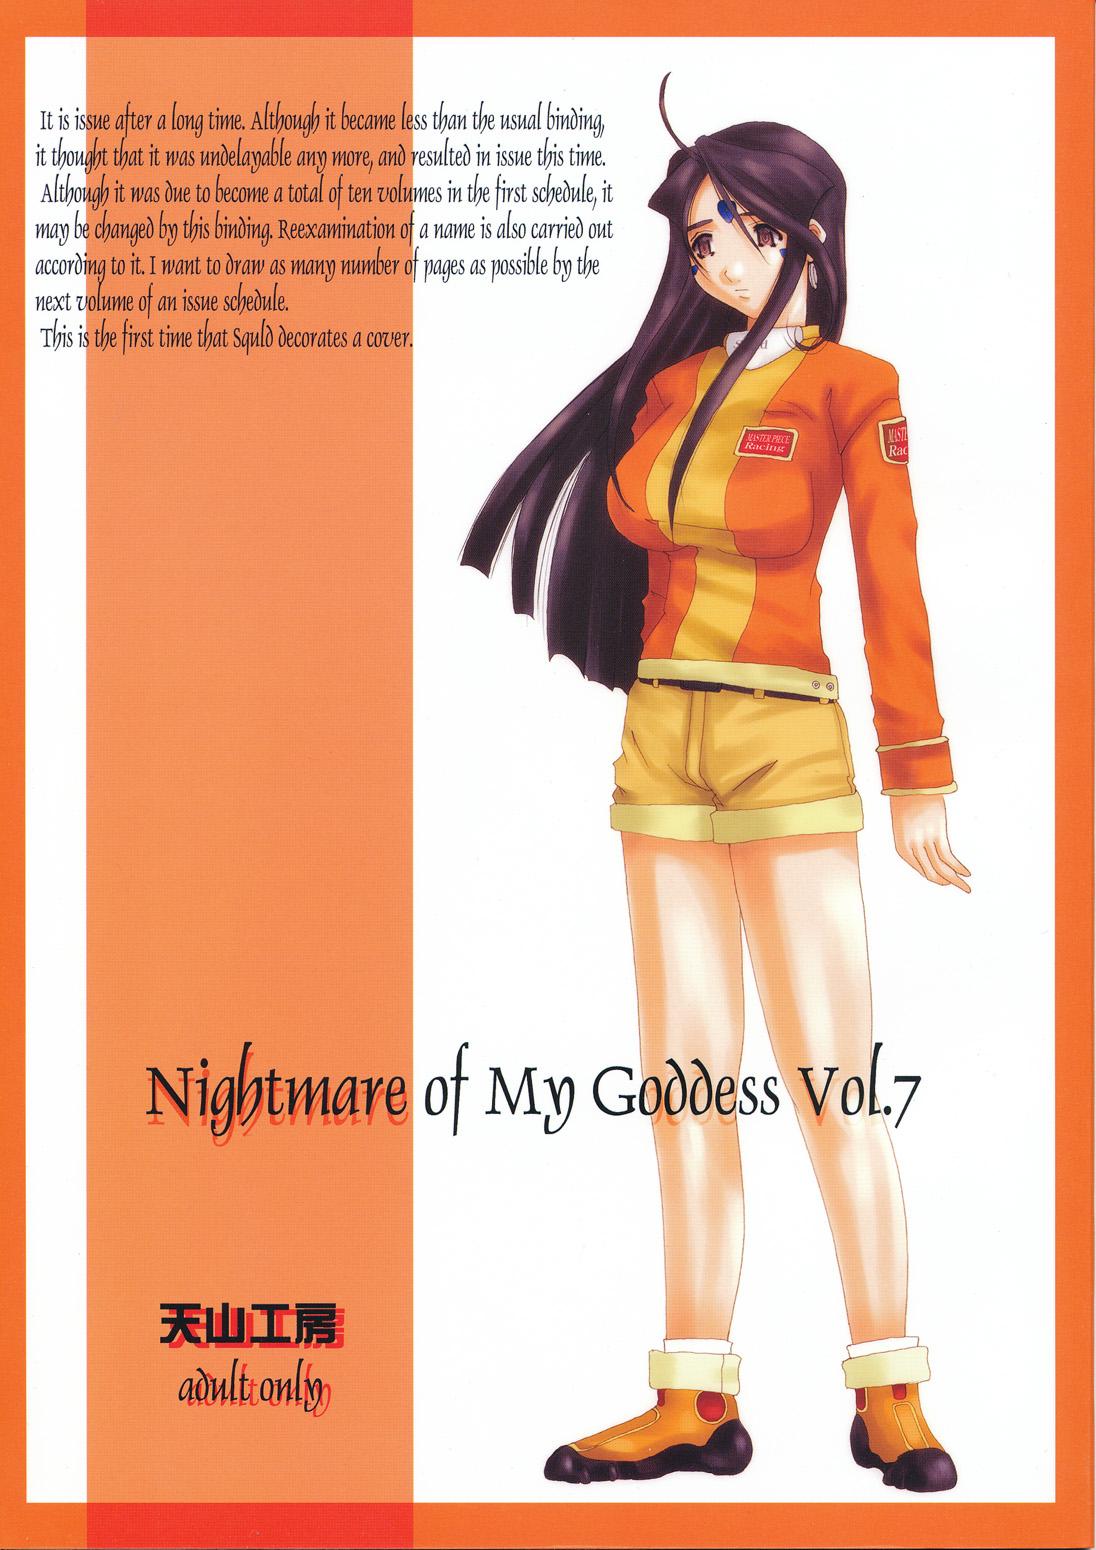 Ejaculations Nightmare of My Goddess Vol. 7 - Ah my goddess Boob - Picture 1